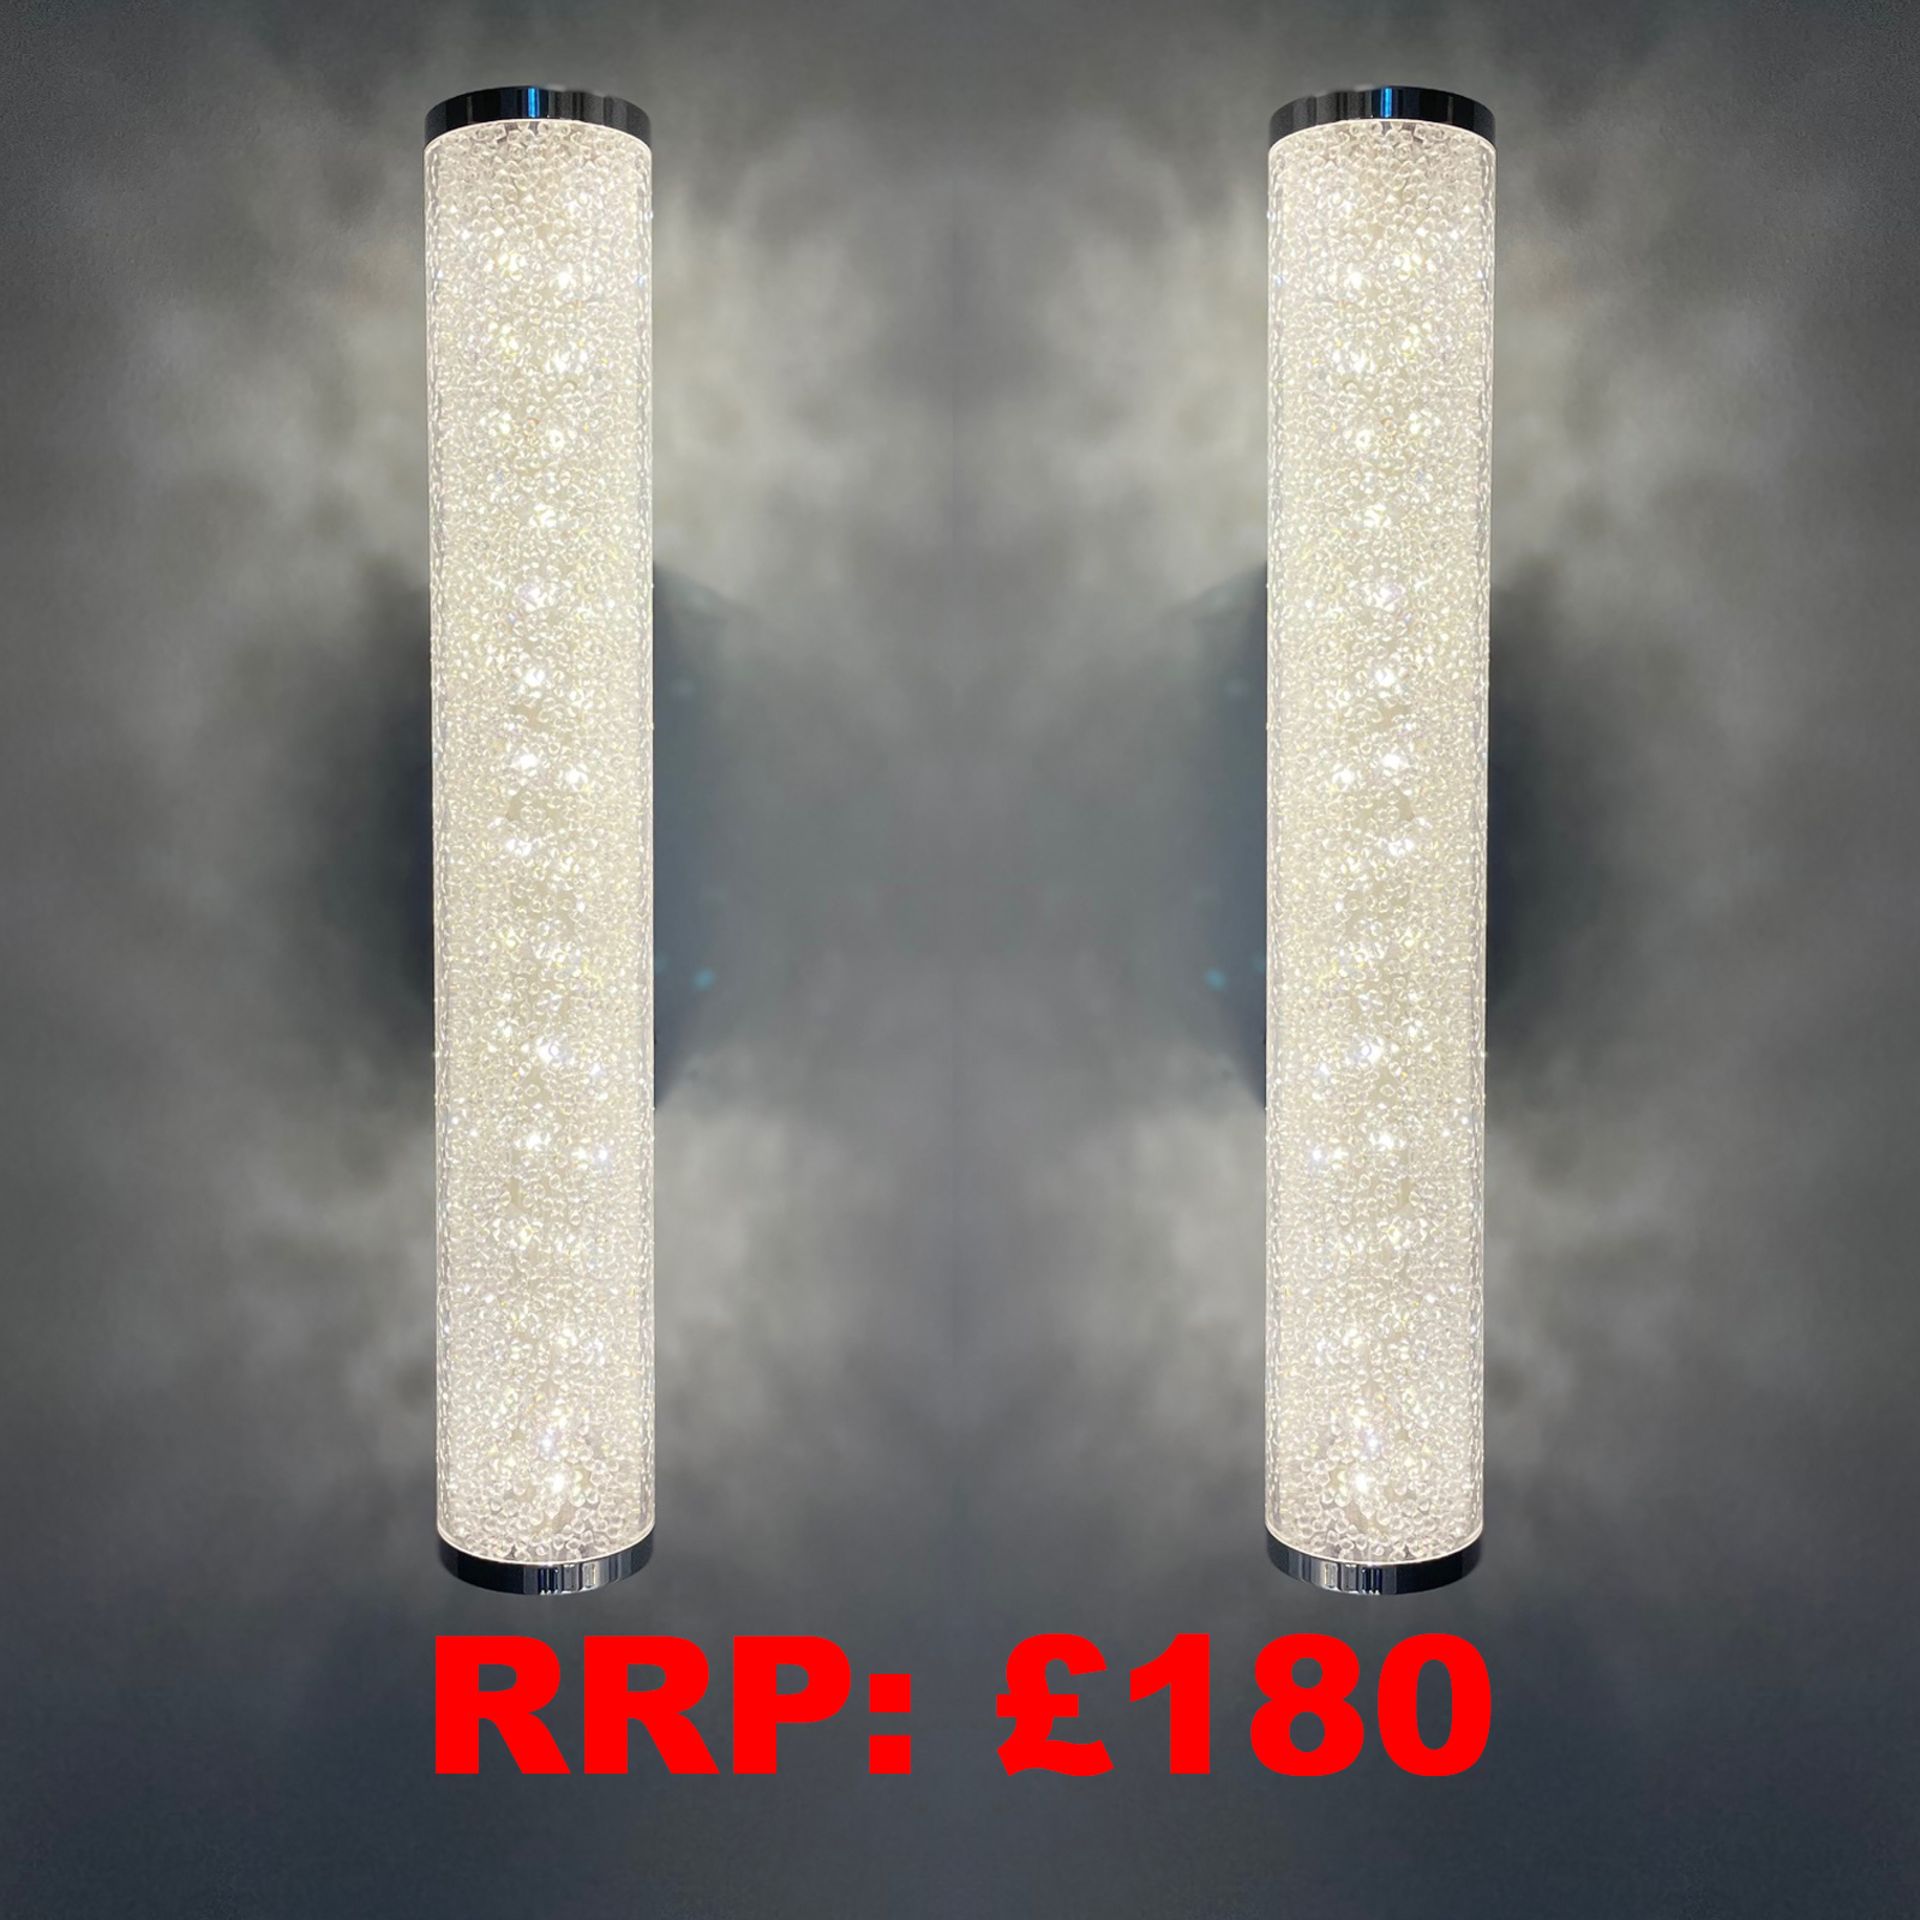 Pack of 2 Modern Crushed Crystal LED Bathroom Mirror Light Wall Light IP44 Cool White